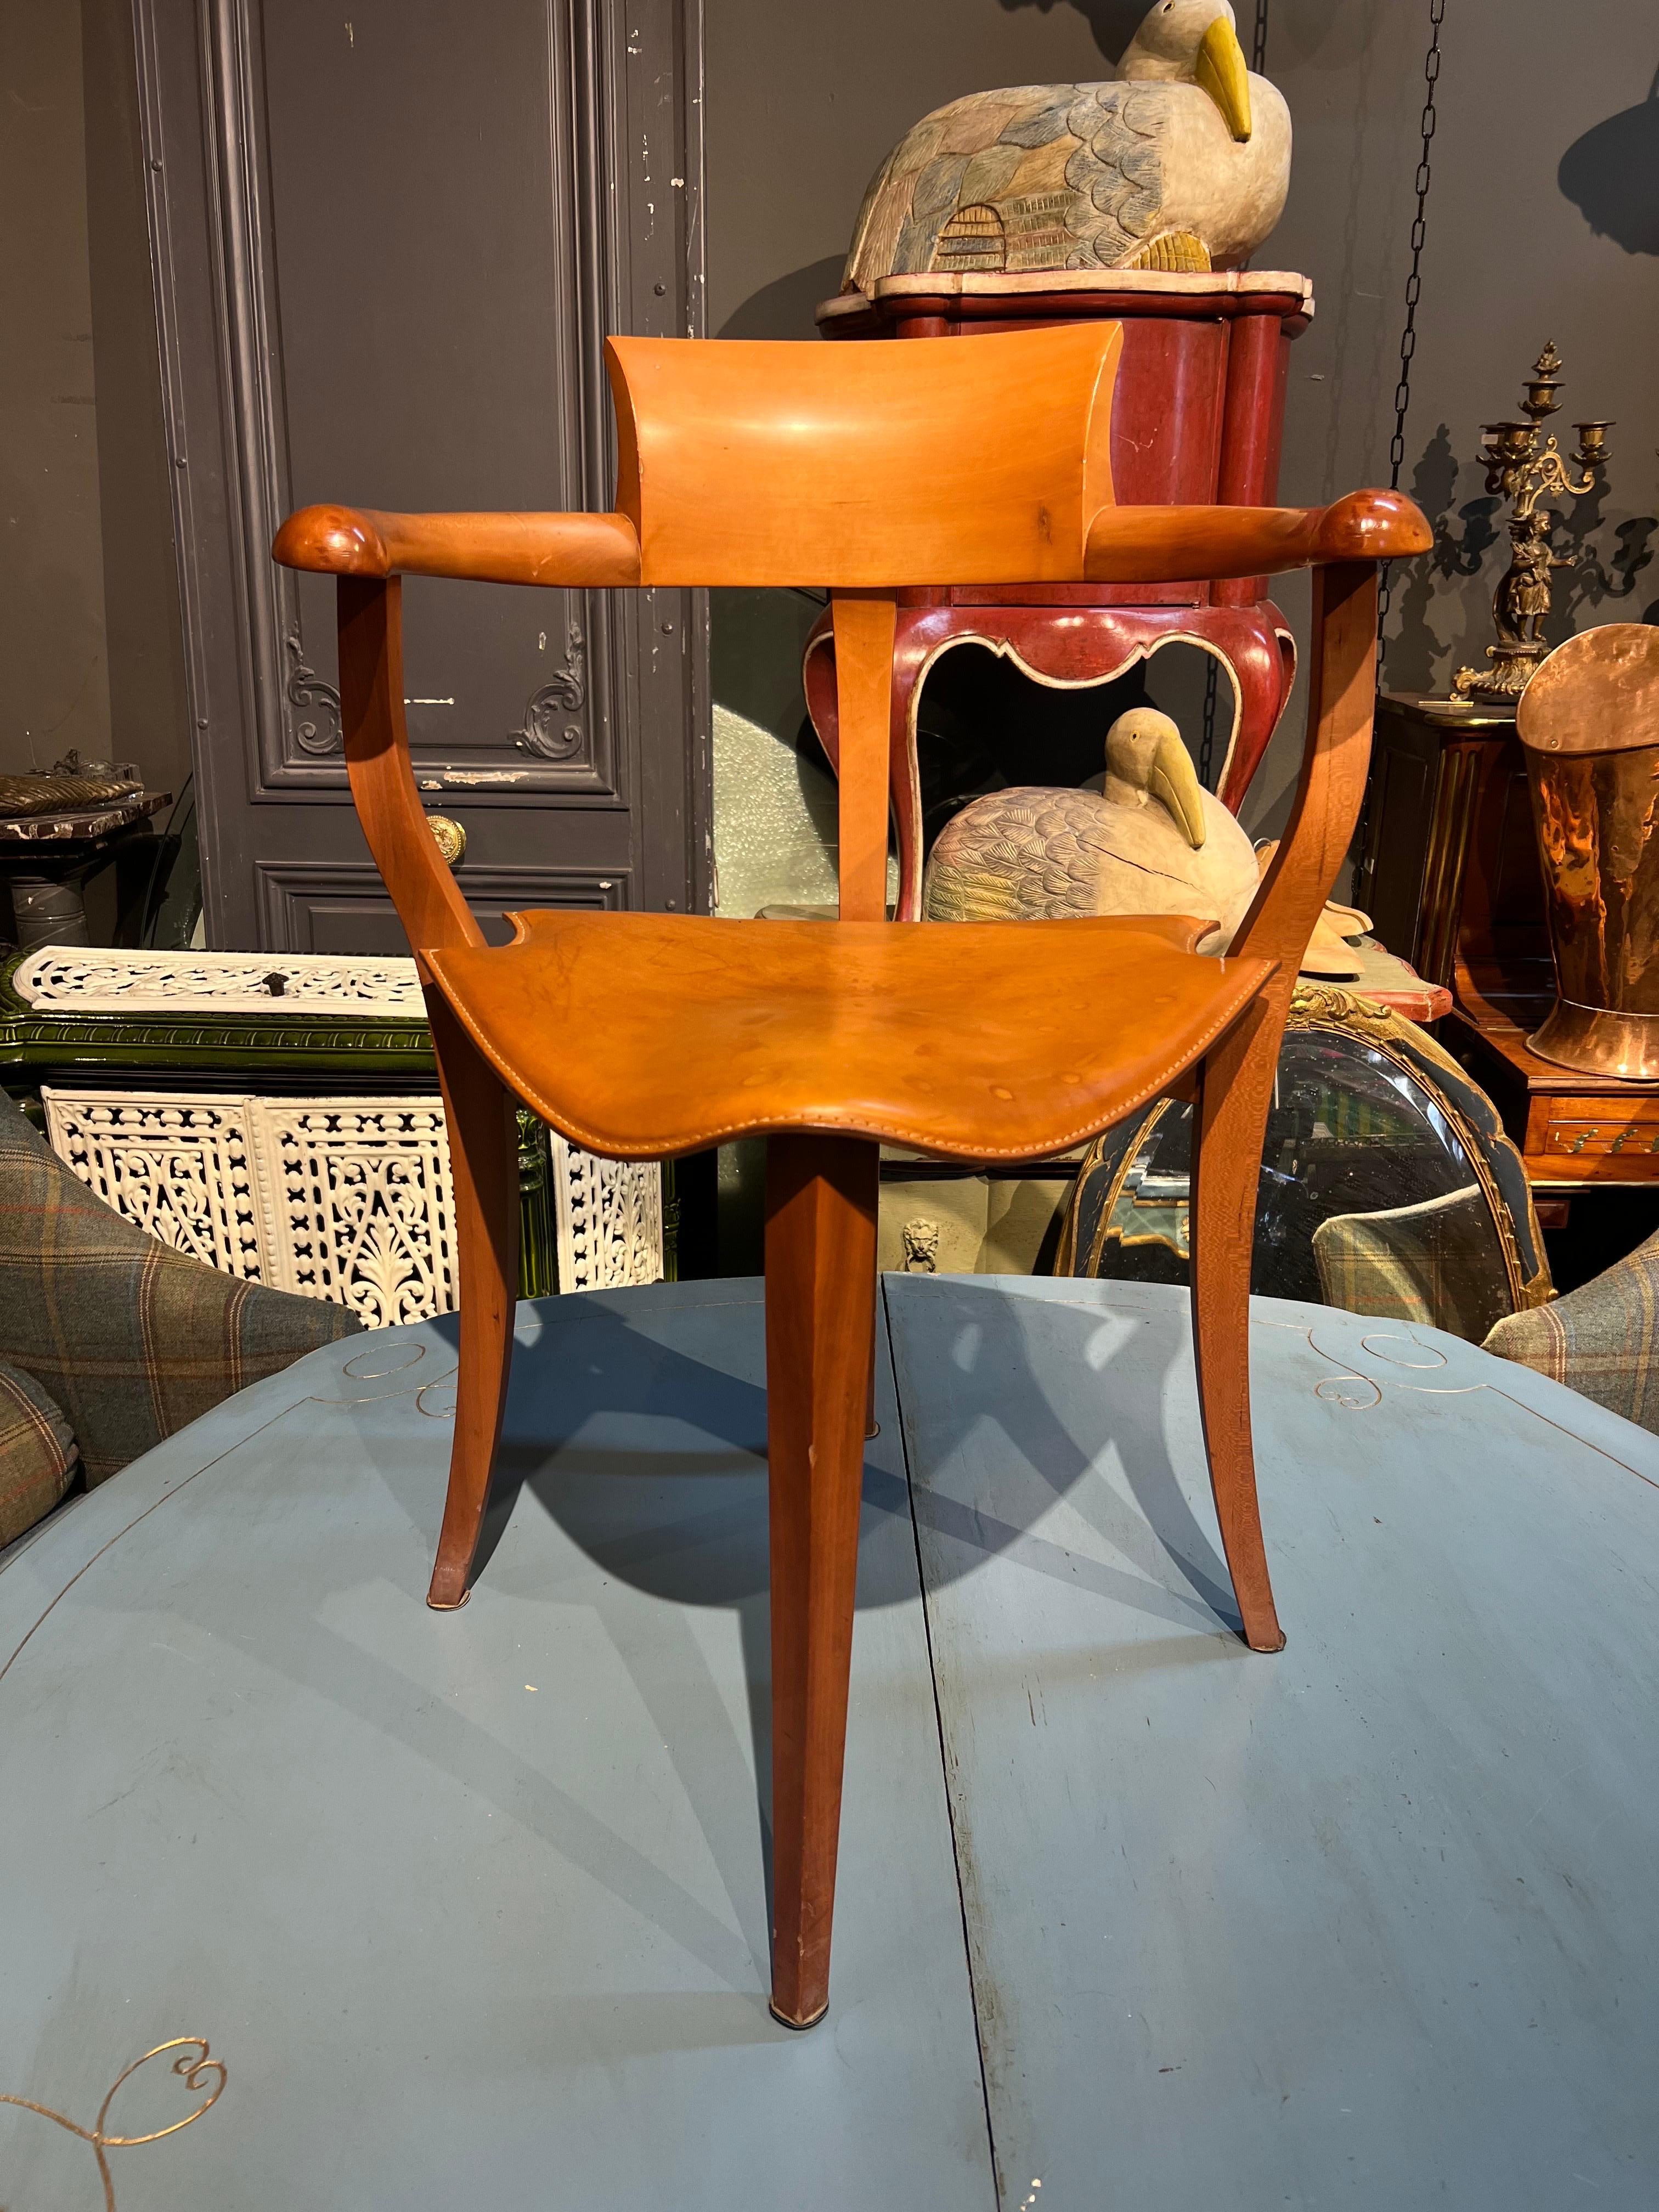 Vintage single side chair made of fruitwood in hand carved frame with matching leather seat. Very comfortable shape and original good condition.
Belguim, circa 1950 